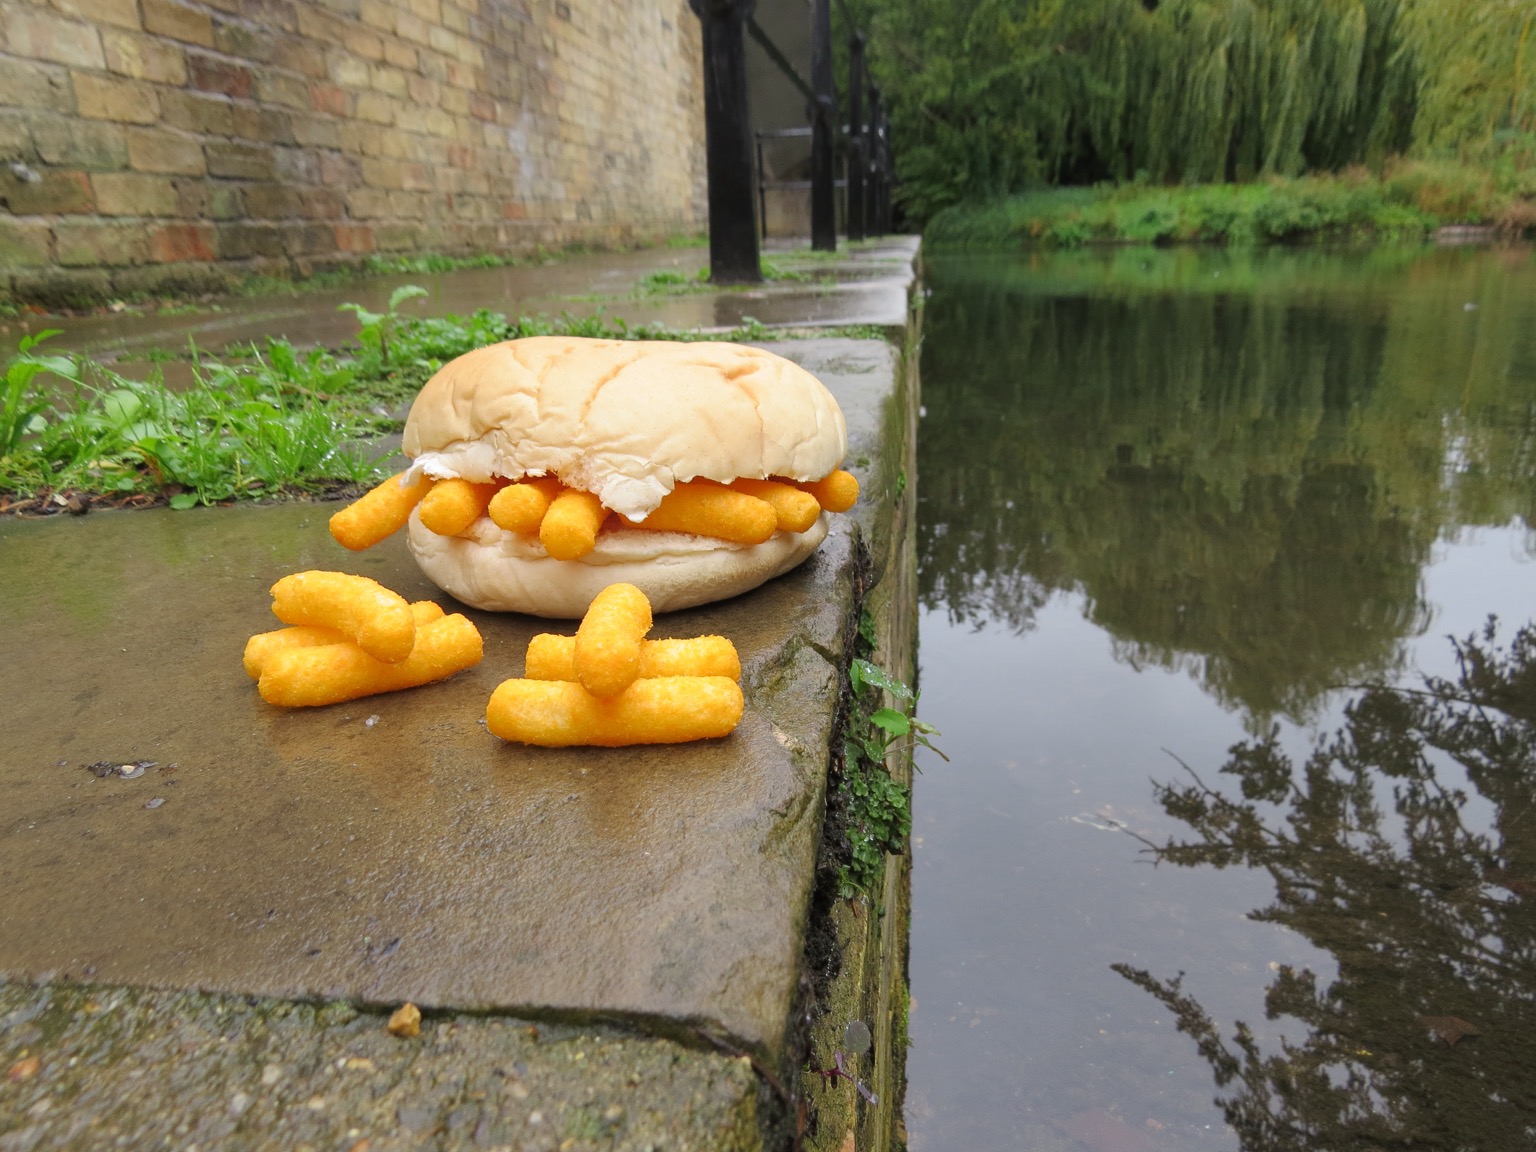 Wotsits in and alongside a roll sat by the water